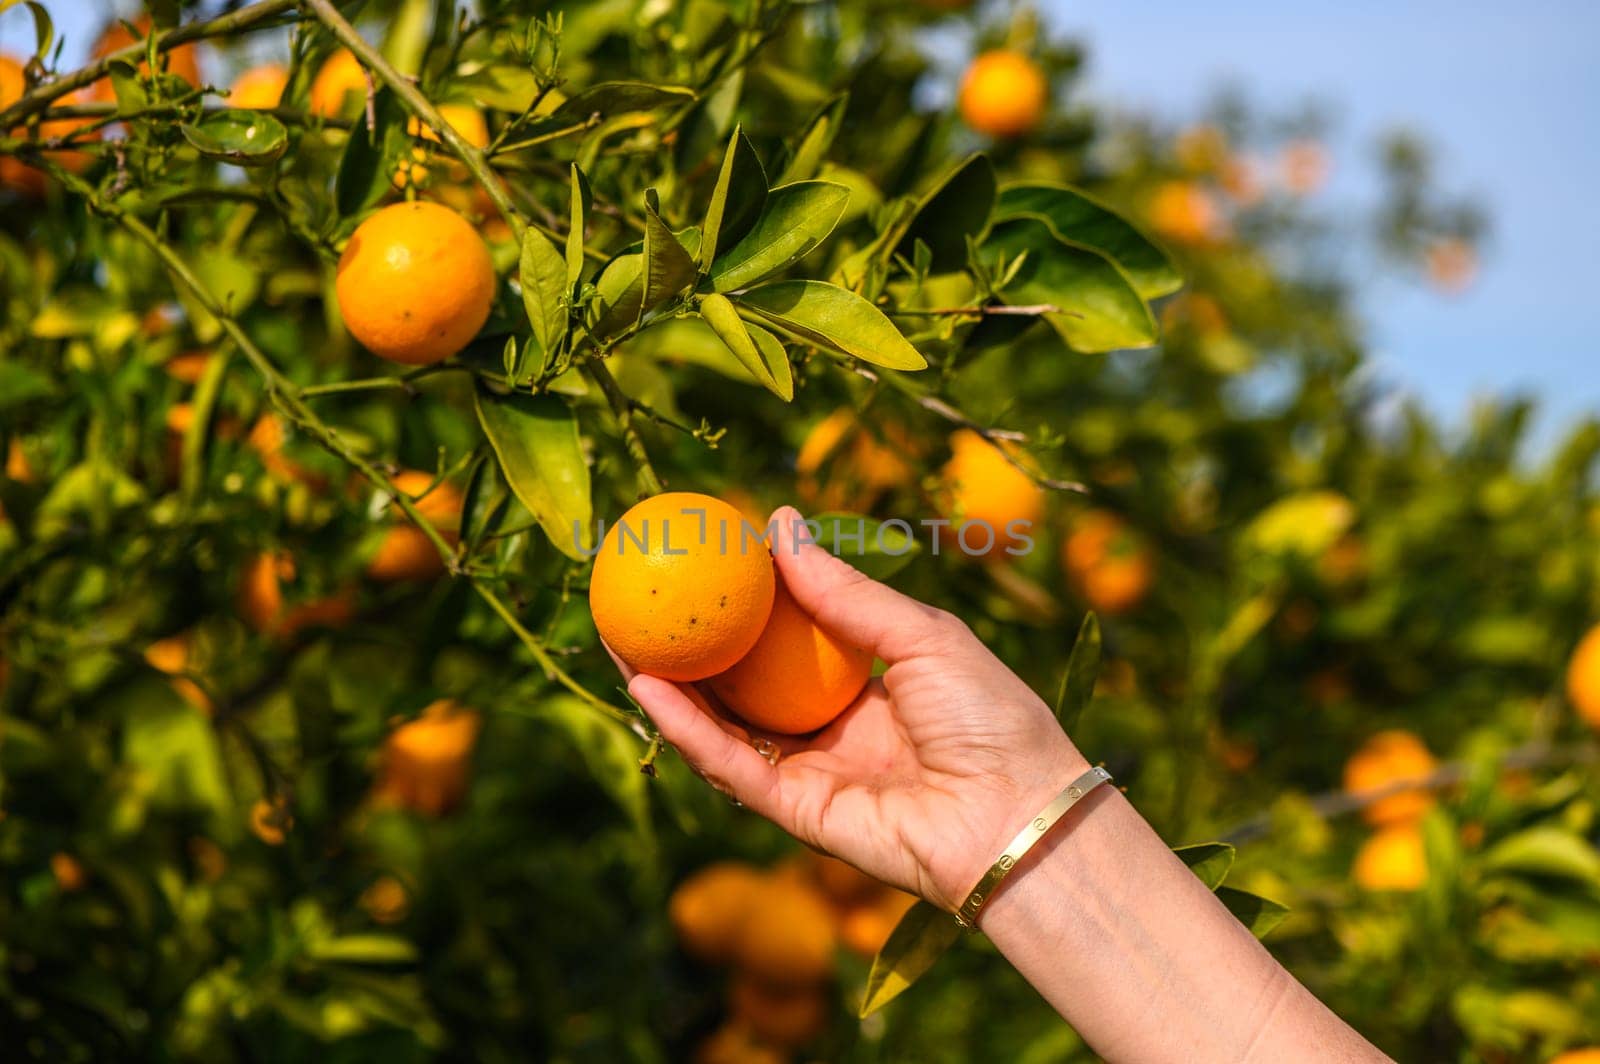 Women's hands pick juicy tasty oranges from a tree in the garden by Mixa74